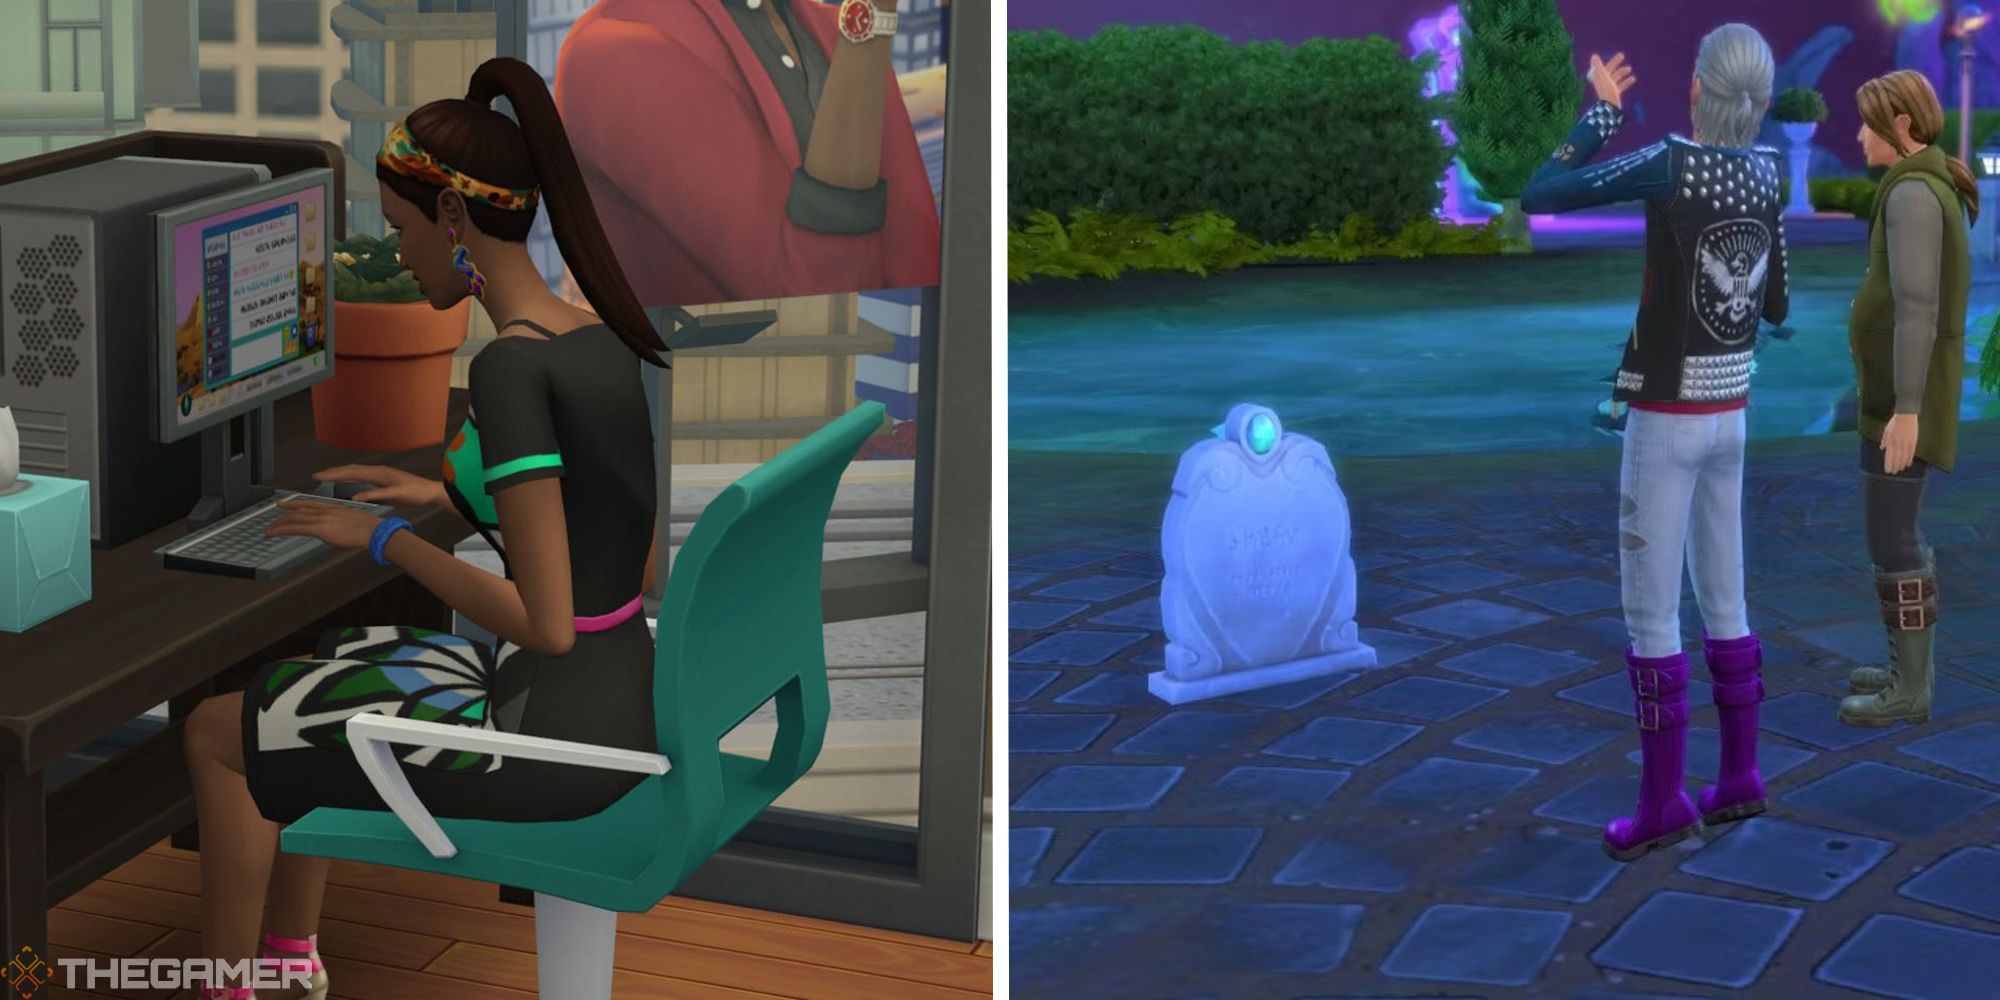 sims 4 book of life featured image showing sim on computer next to two sims at a gravestone